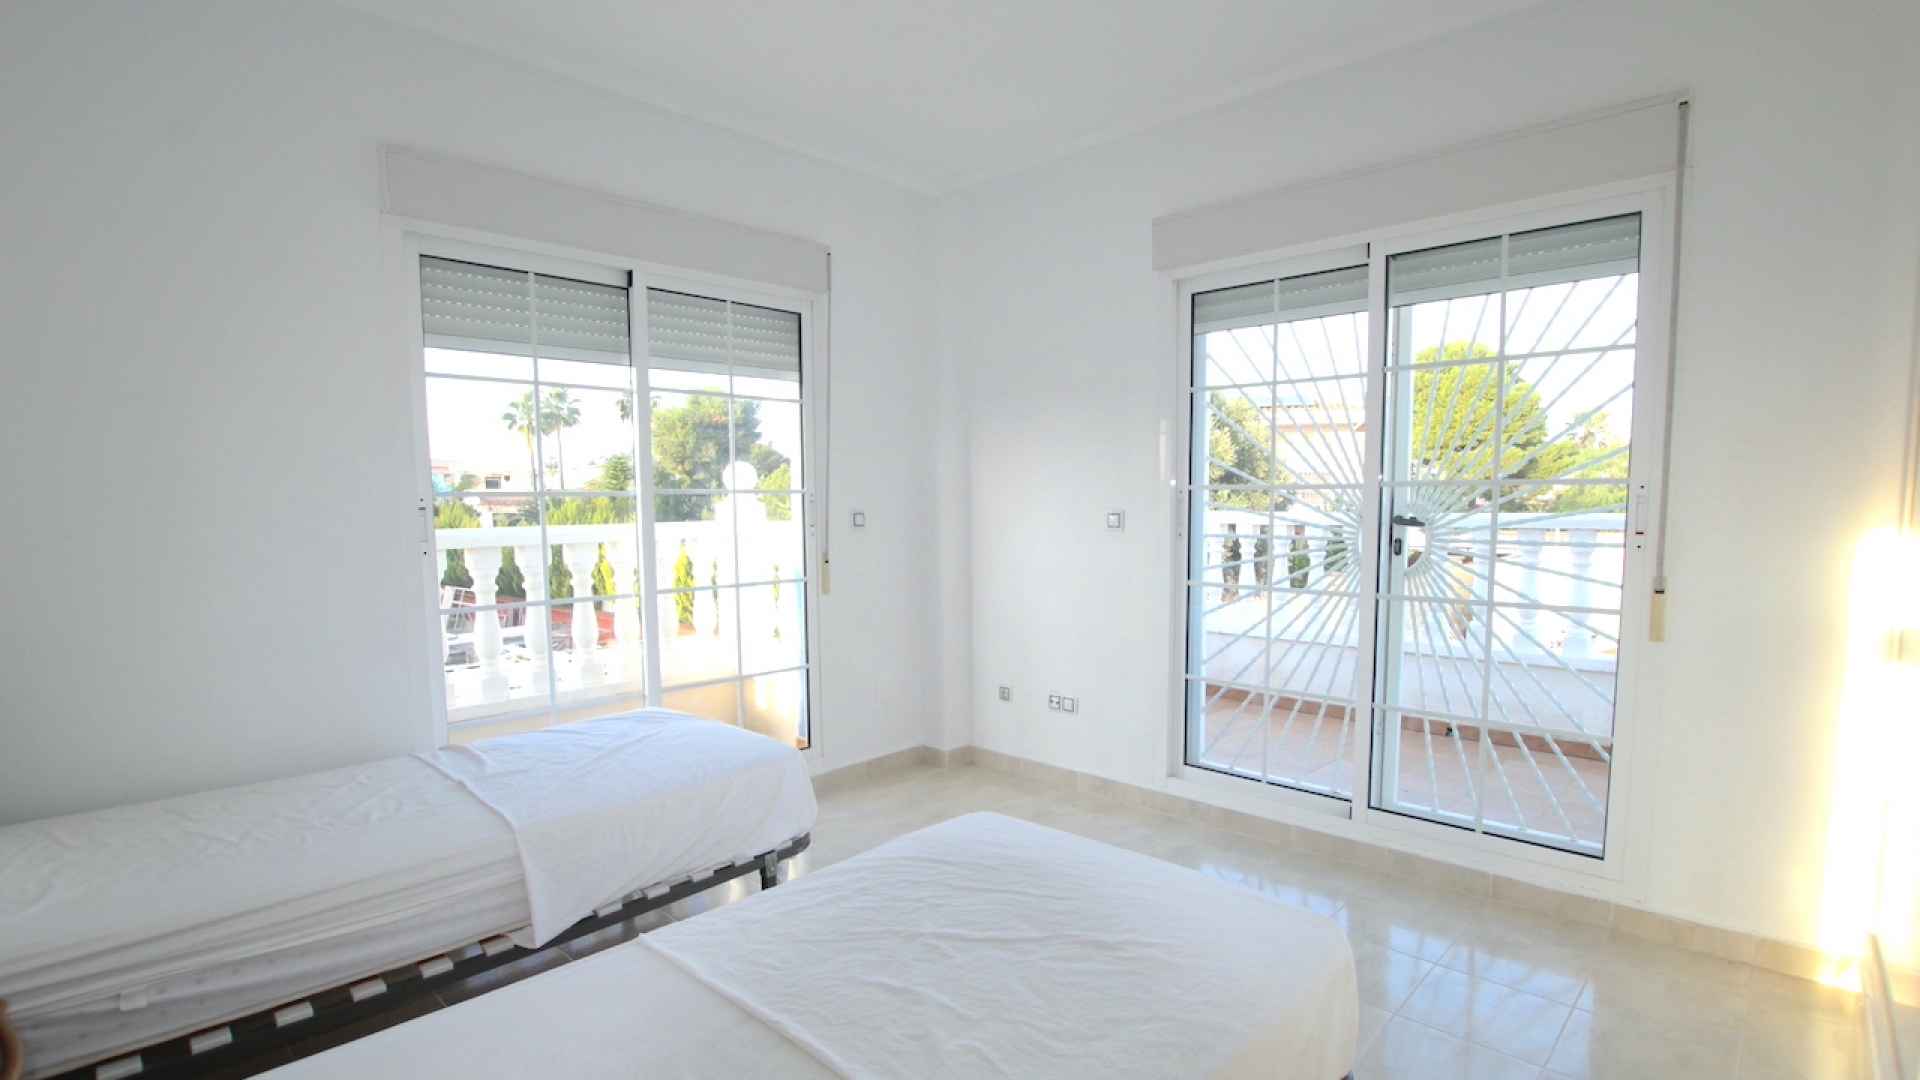 47910_fabulous_4_bedroom_villa_with_pool_central_quesada_131222115510_img_1952